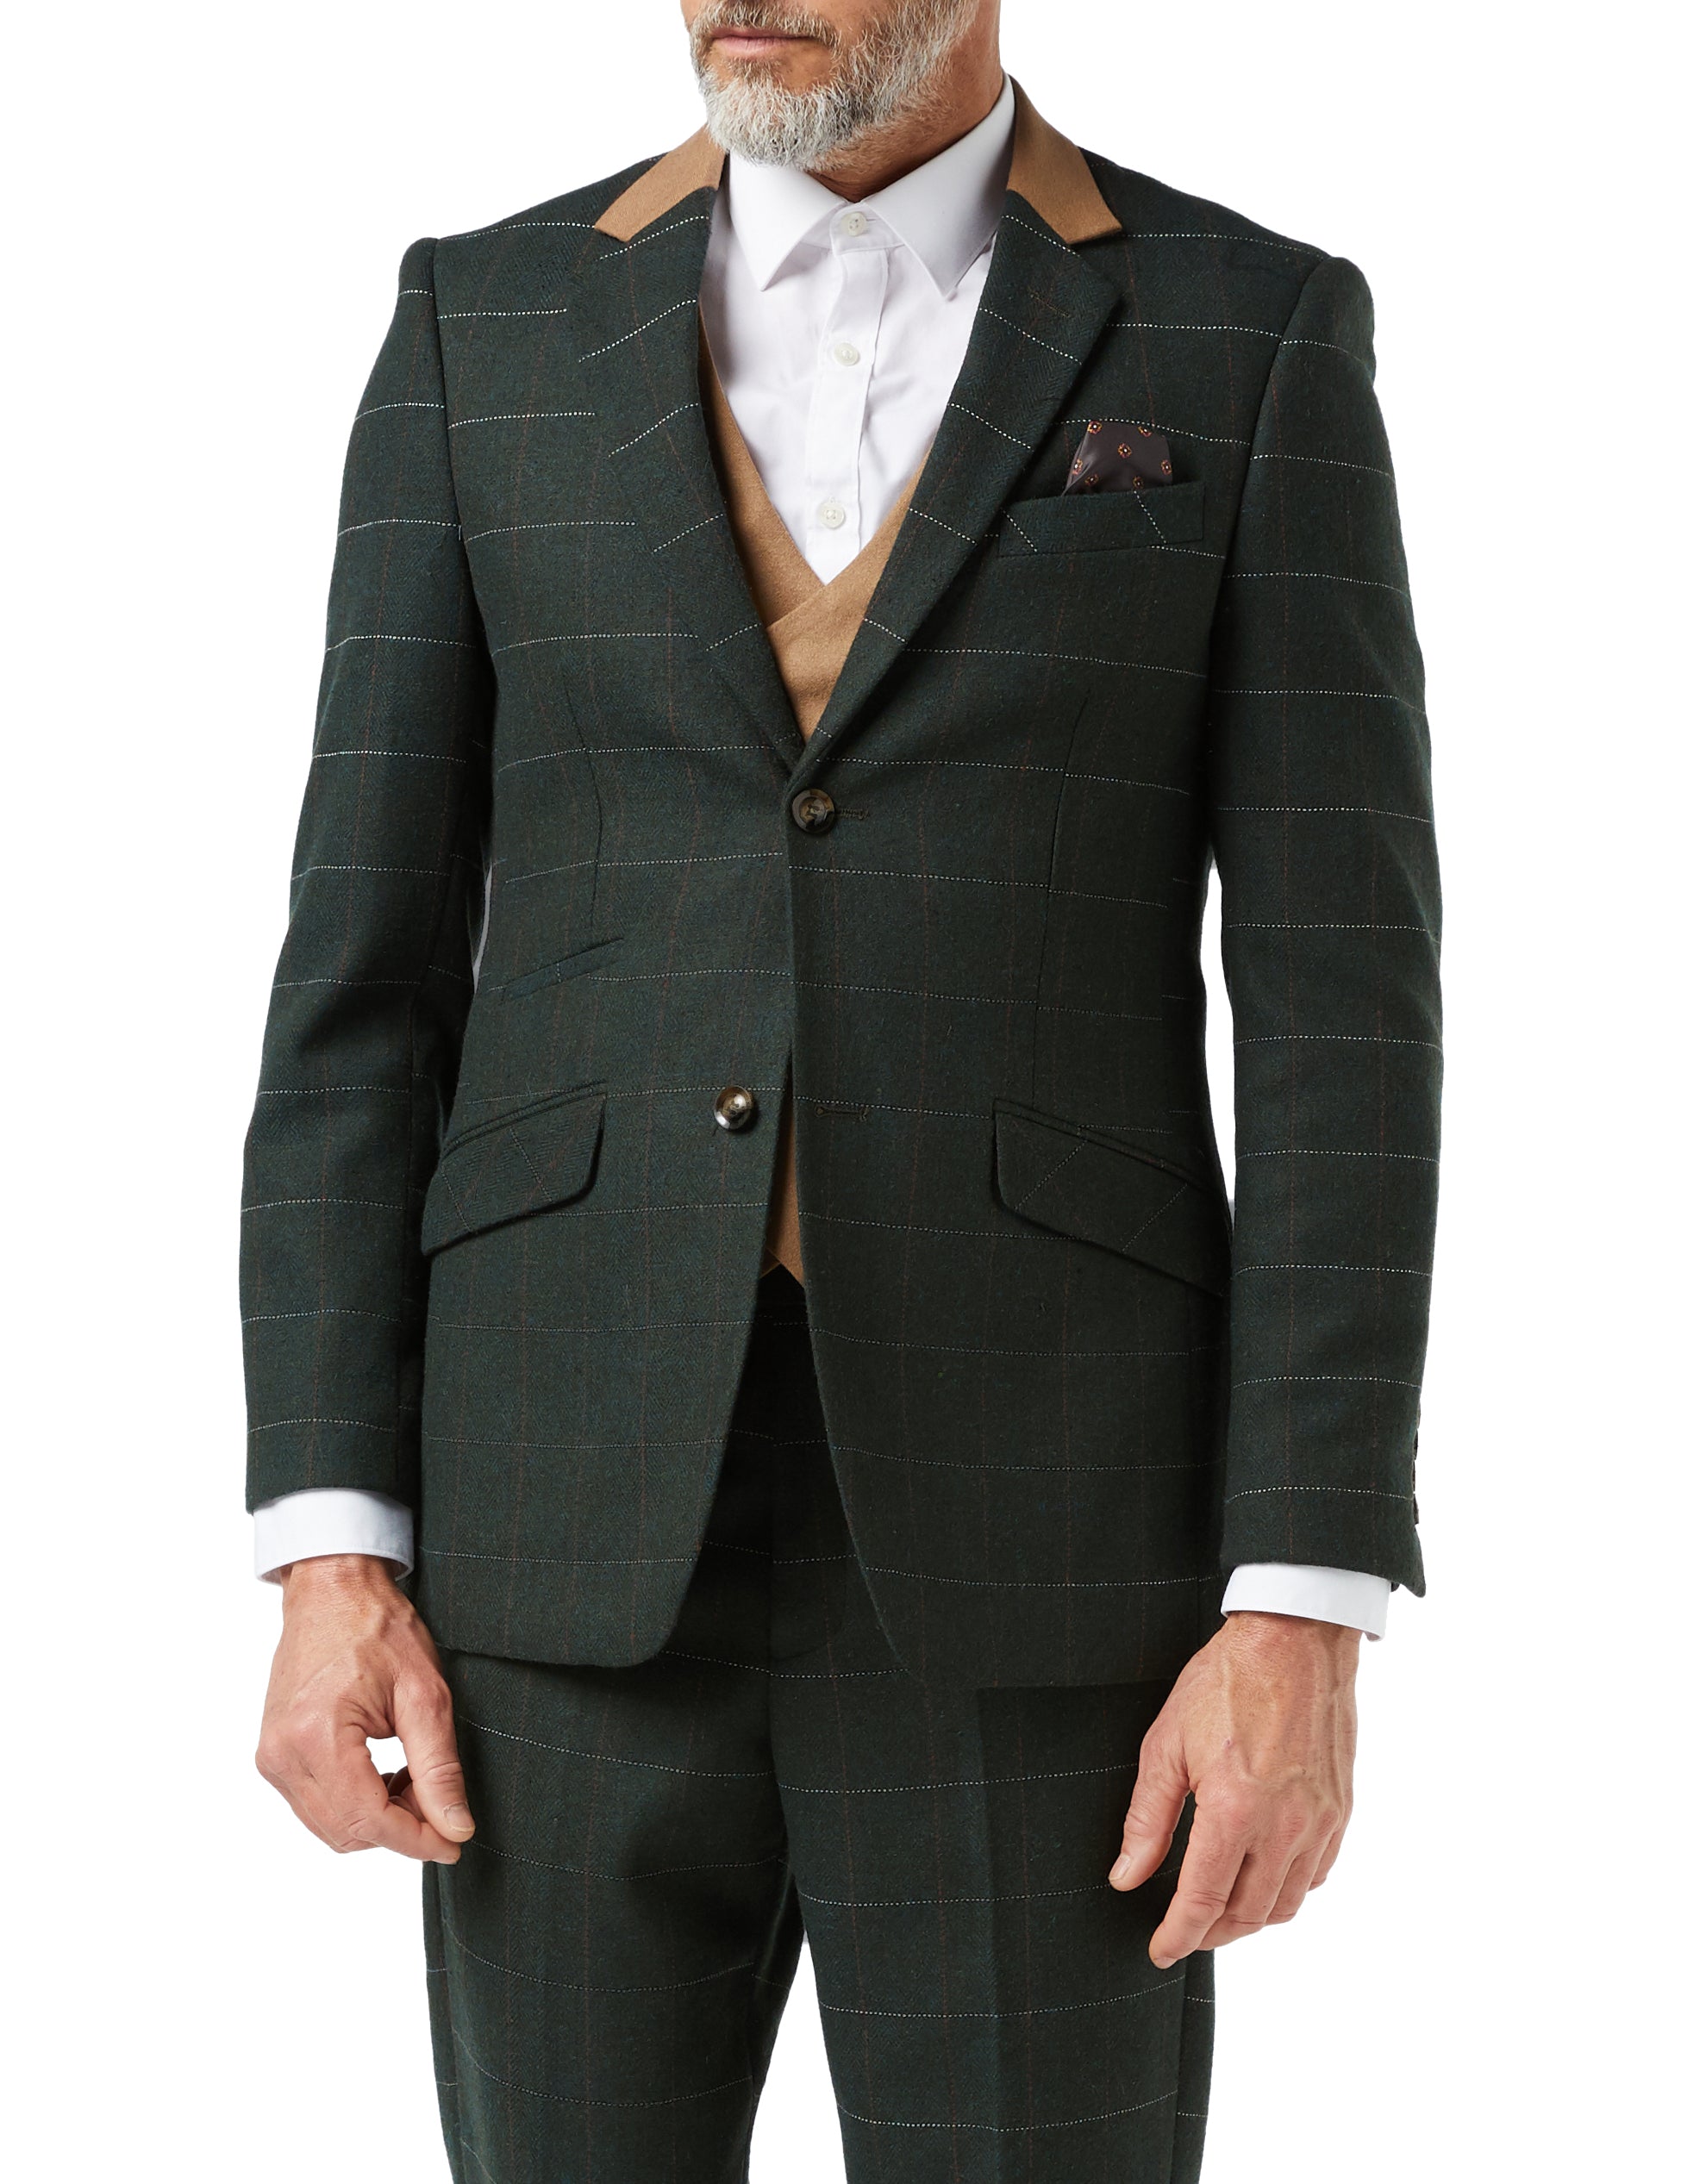 Mens Classic 3 Piece Tweed Suit Olive Green Herringbone Check Smart Tailored Fit